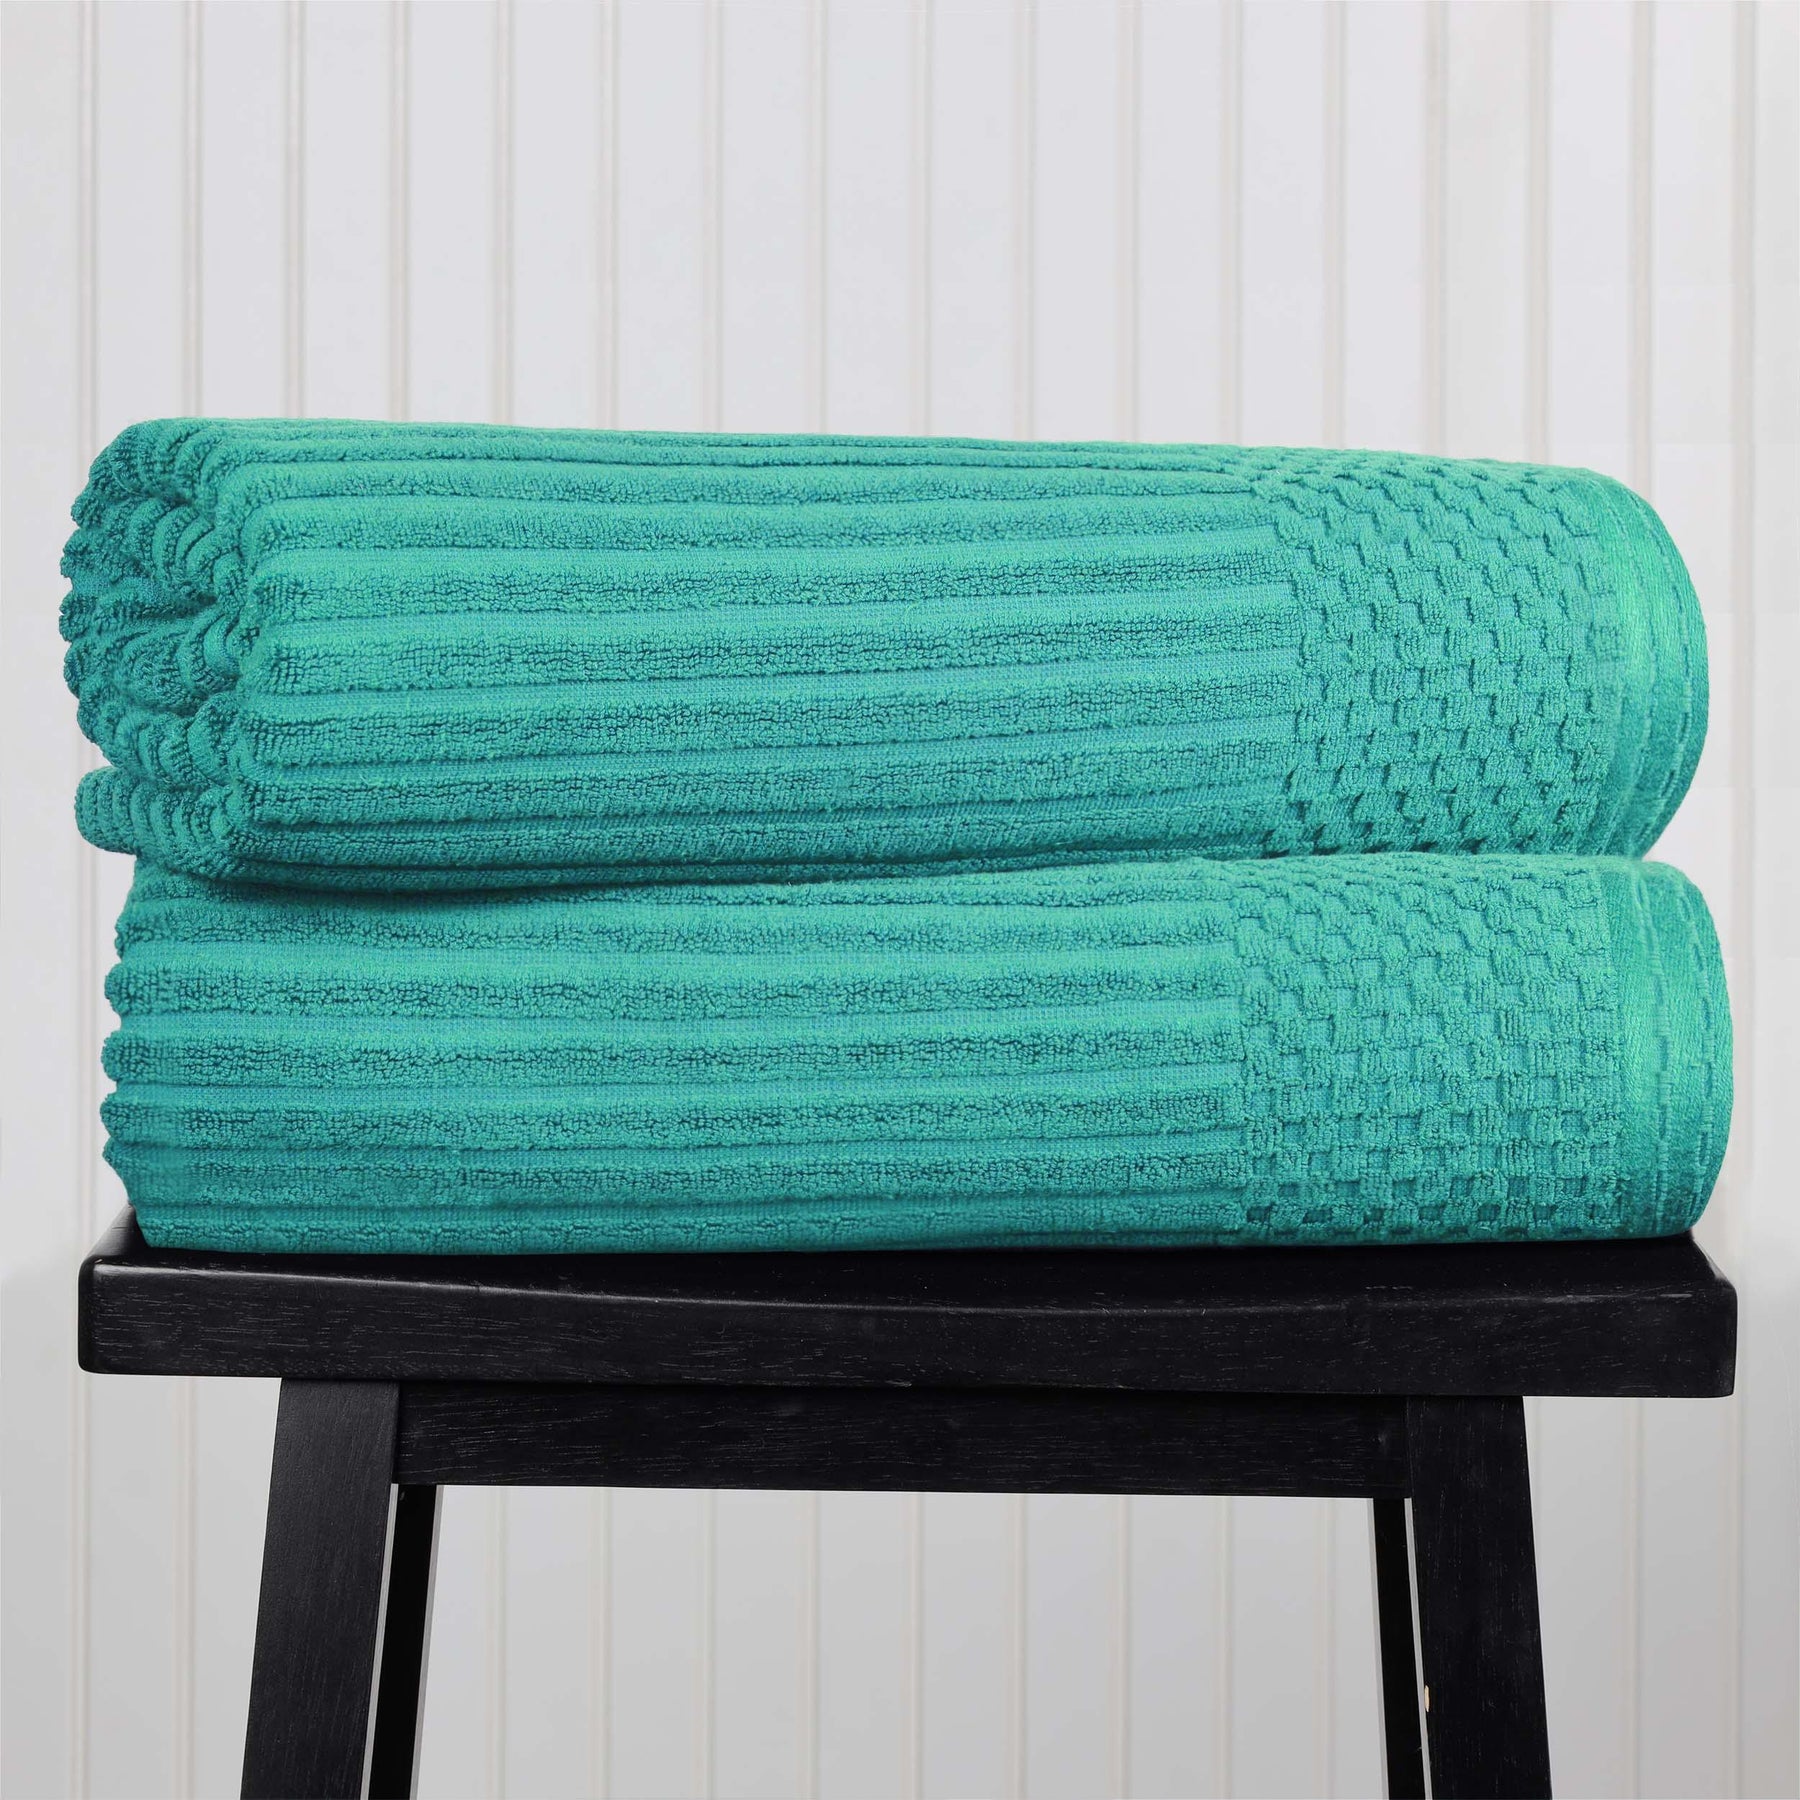 Ribbed Textured Cotton Bath Sheet Ultra-Absorbent Towel Set -  Turquoise